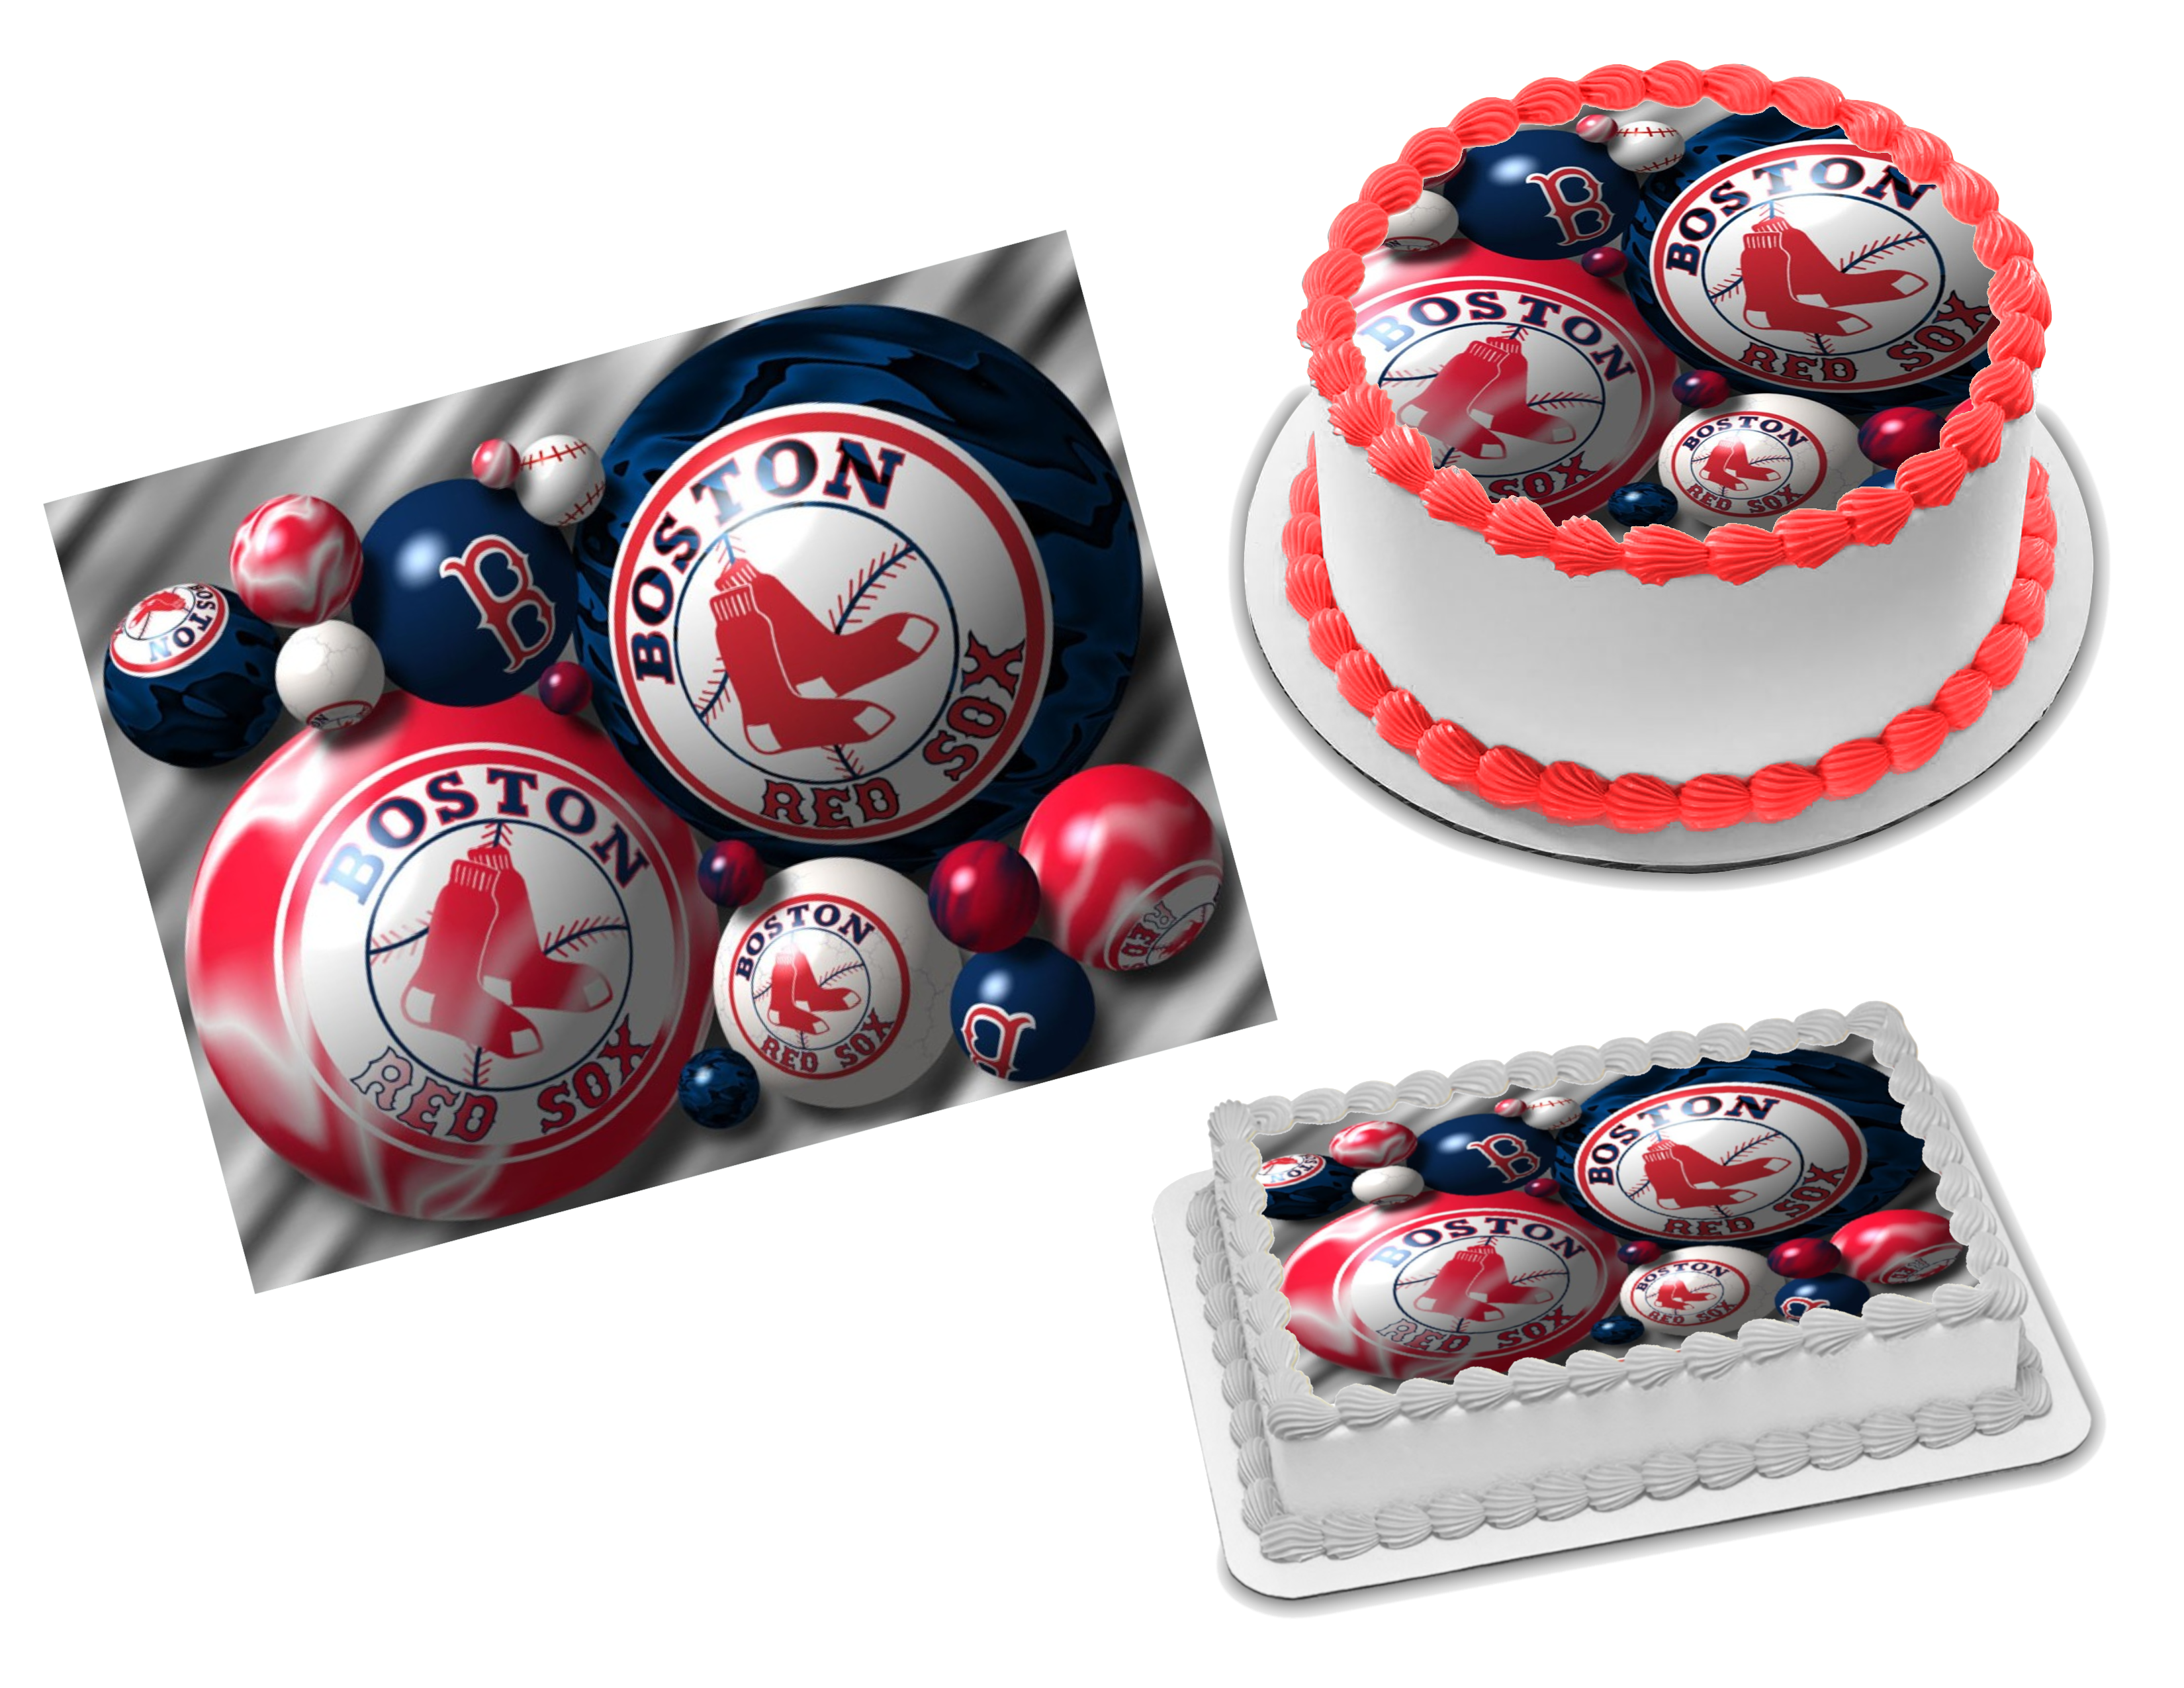 Boston Red Sox Cake - CakeCentral.com